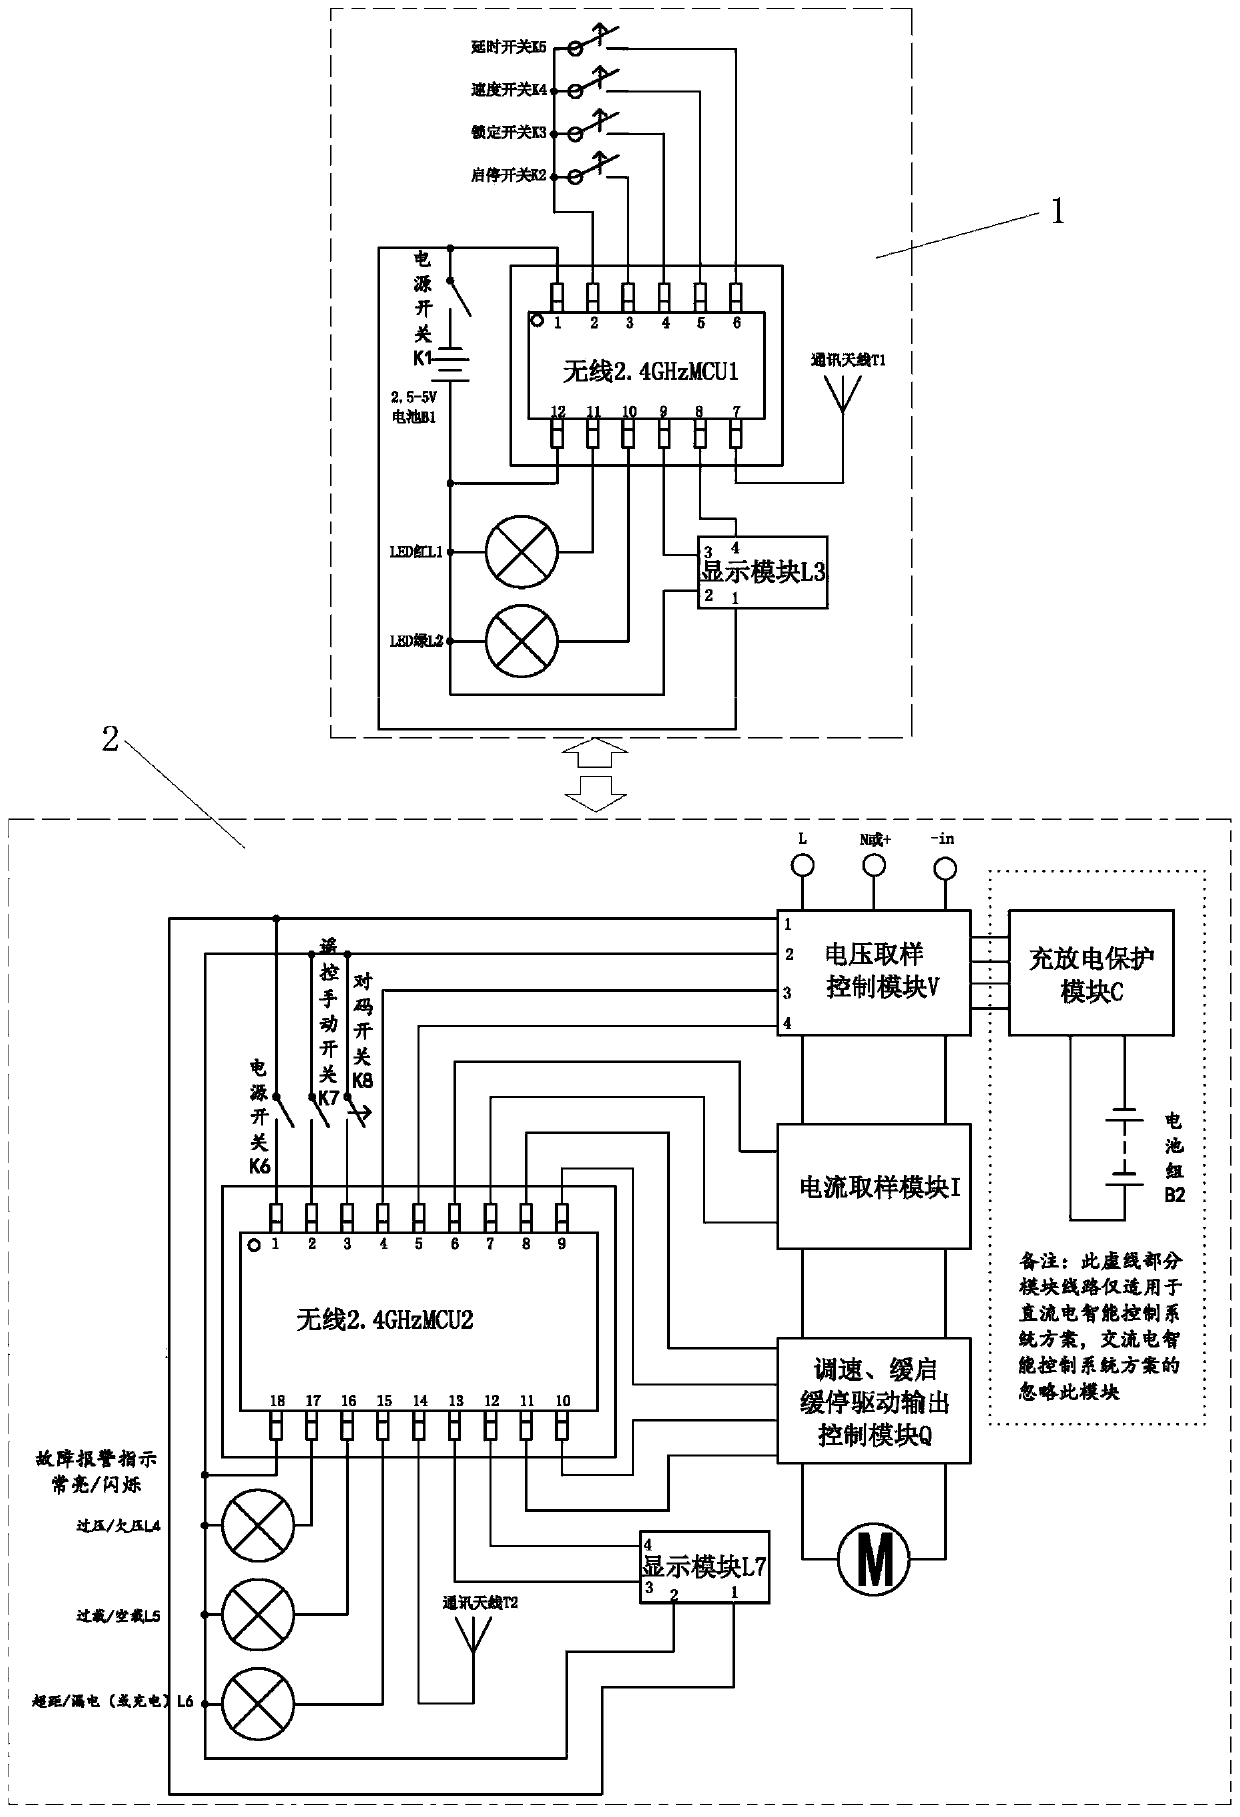 Wireless remote control intelligent control system for electrical device